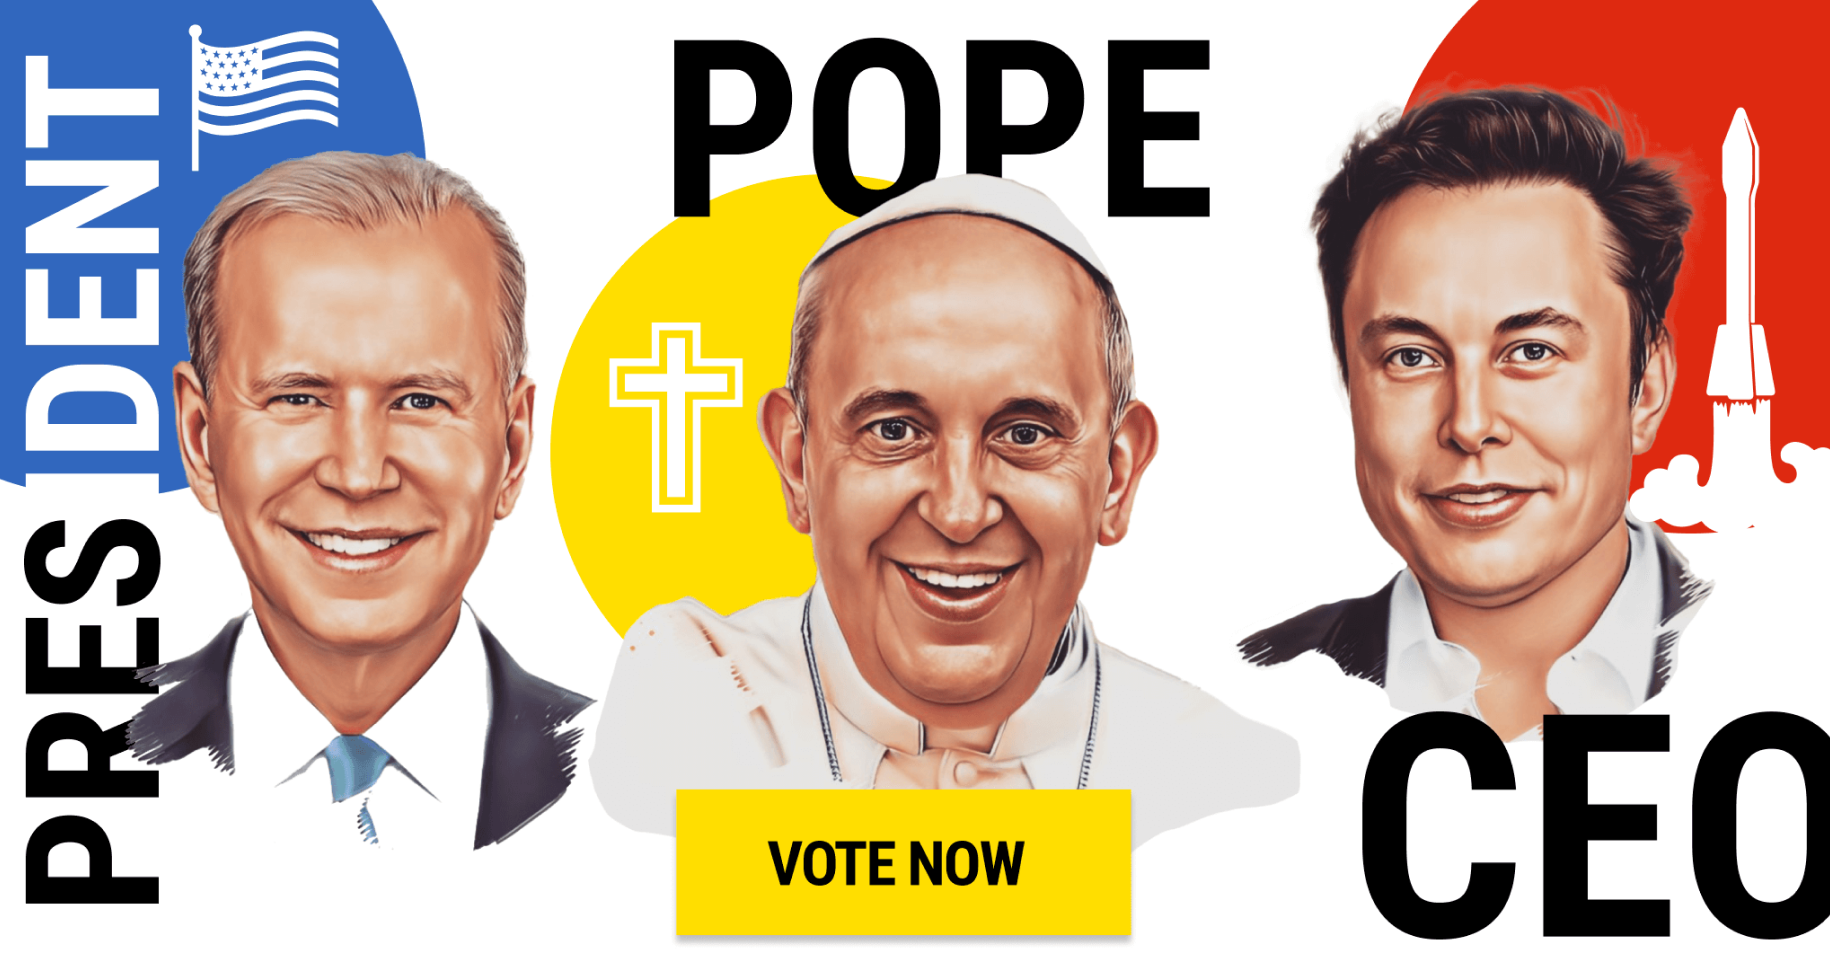 Pope, President or CEO